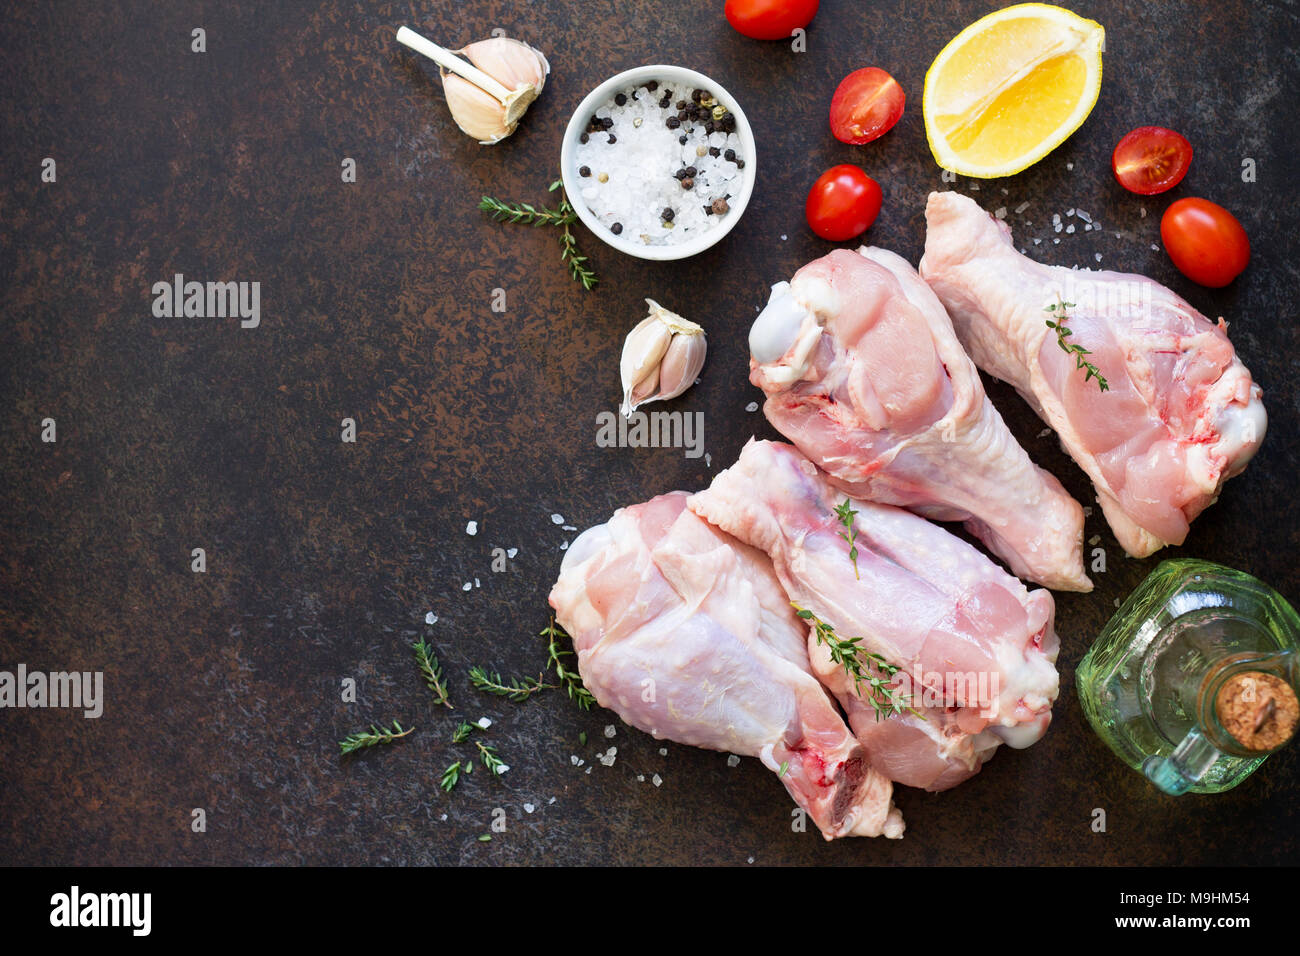 Fresh meat. Raw turkey shin and spices on a stone table. Copy space. Stock Photo